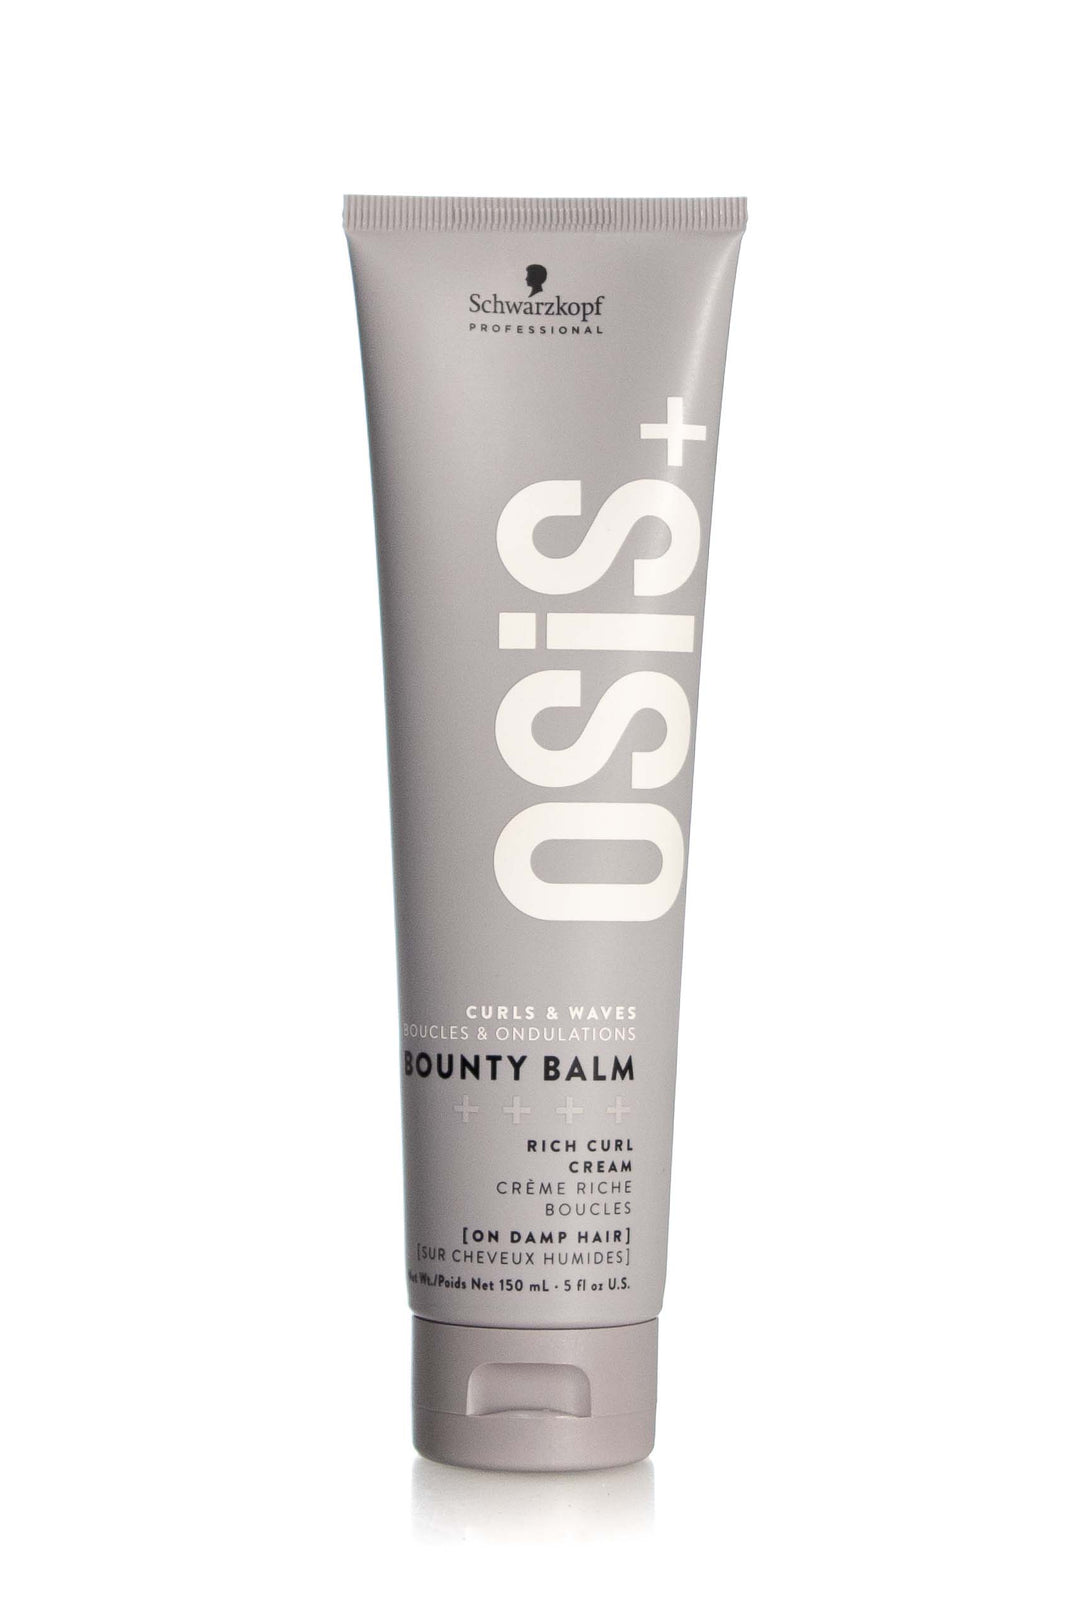 Schwarzkopf Osis+ Curl and Waves Bounty Balm